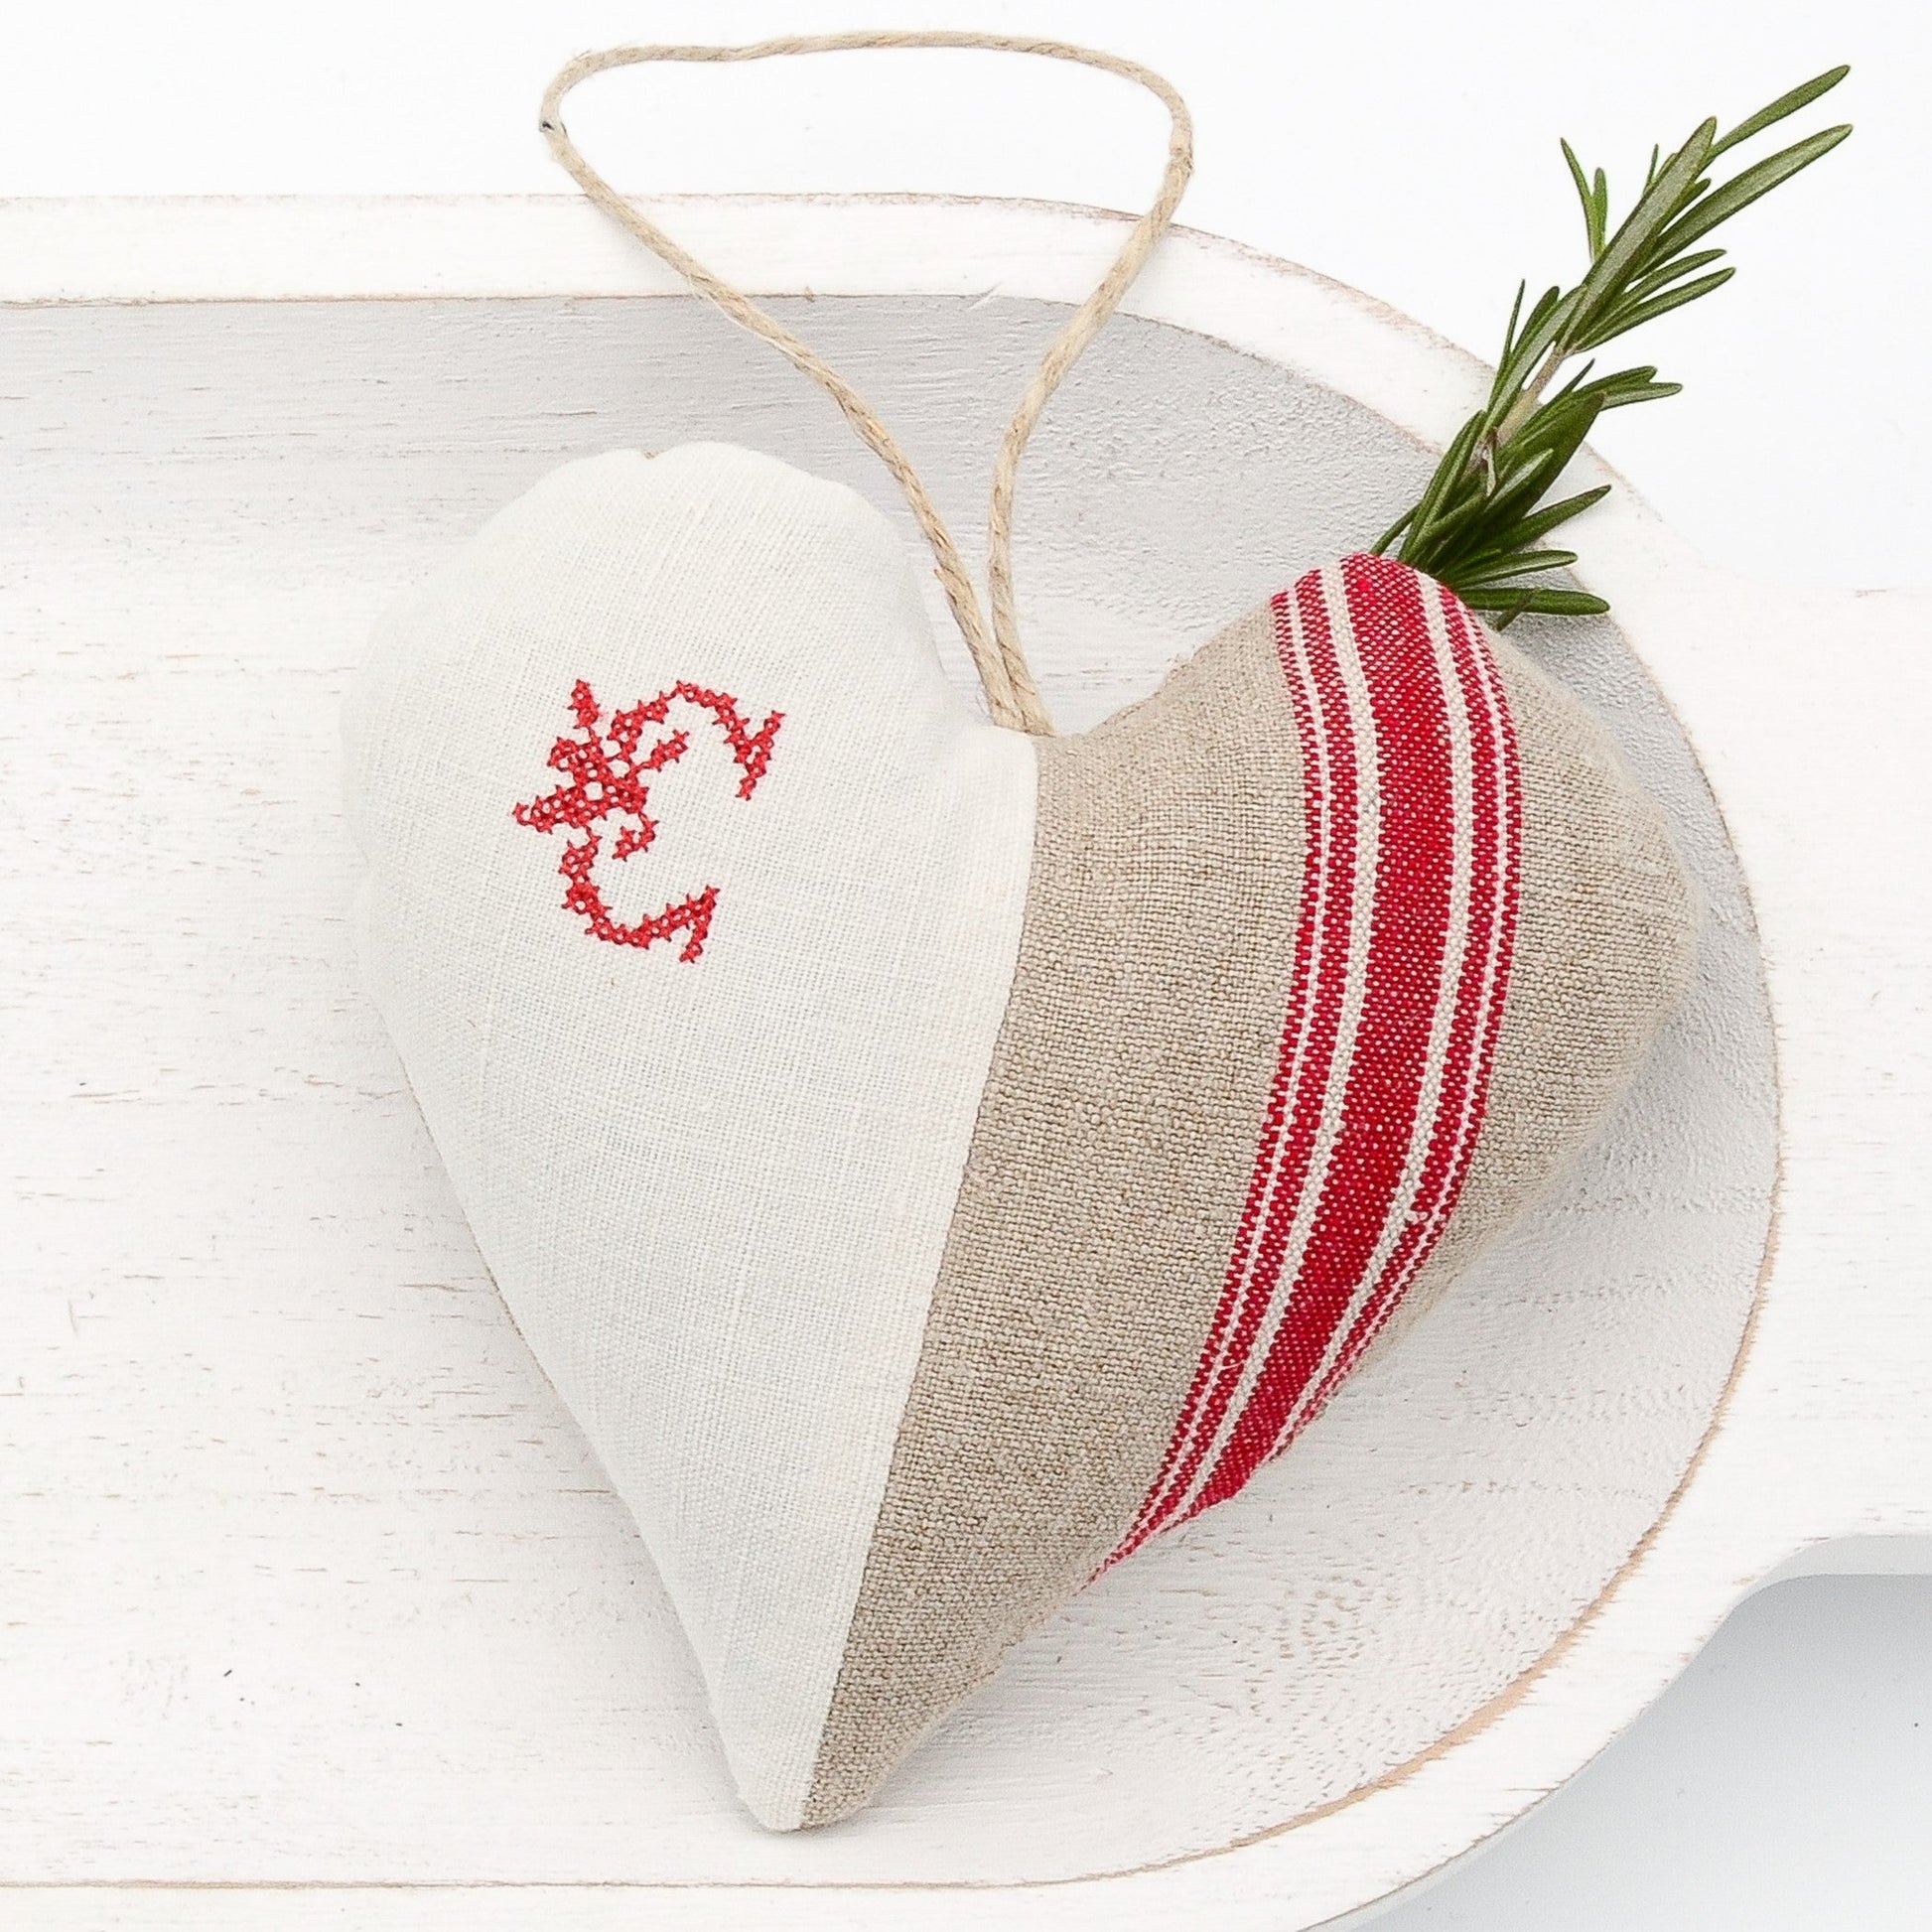 Antique European white linen and red-striped German mangle cloth natural tone linen lavender sachet heart, letter "C" monogram (all letters available) embroidered in red cross stitch, hemp twine tie, filled with high quality lavender from Provence France